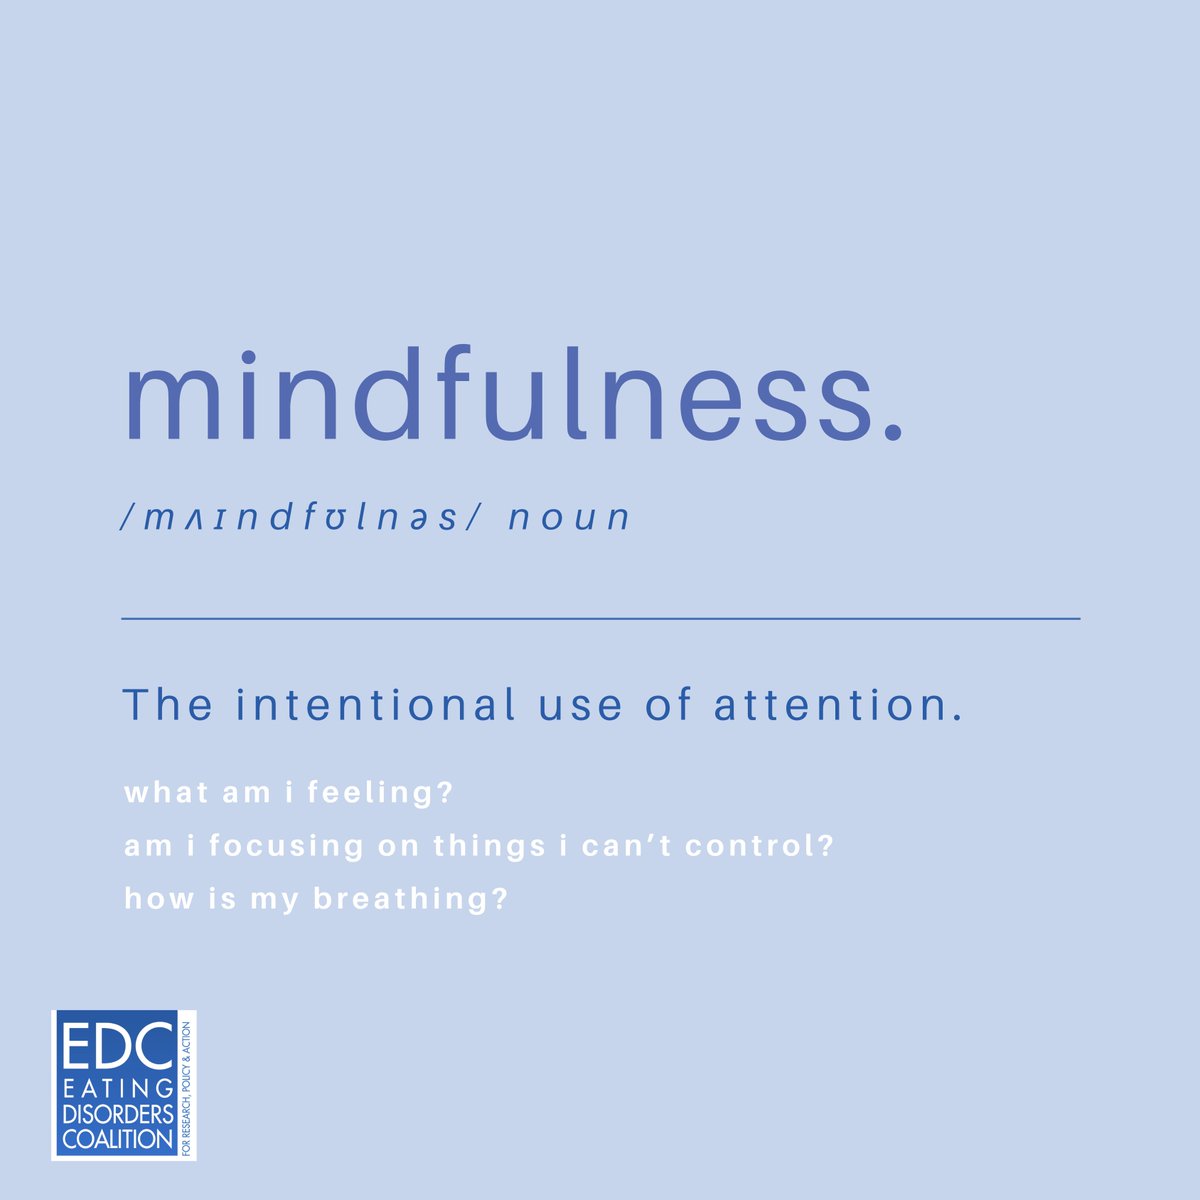 Mindfulness is not about clearing your mind of worries, but choosing to be intentional in where you focus your attention. #EDCMotivationMonday